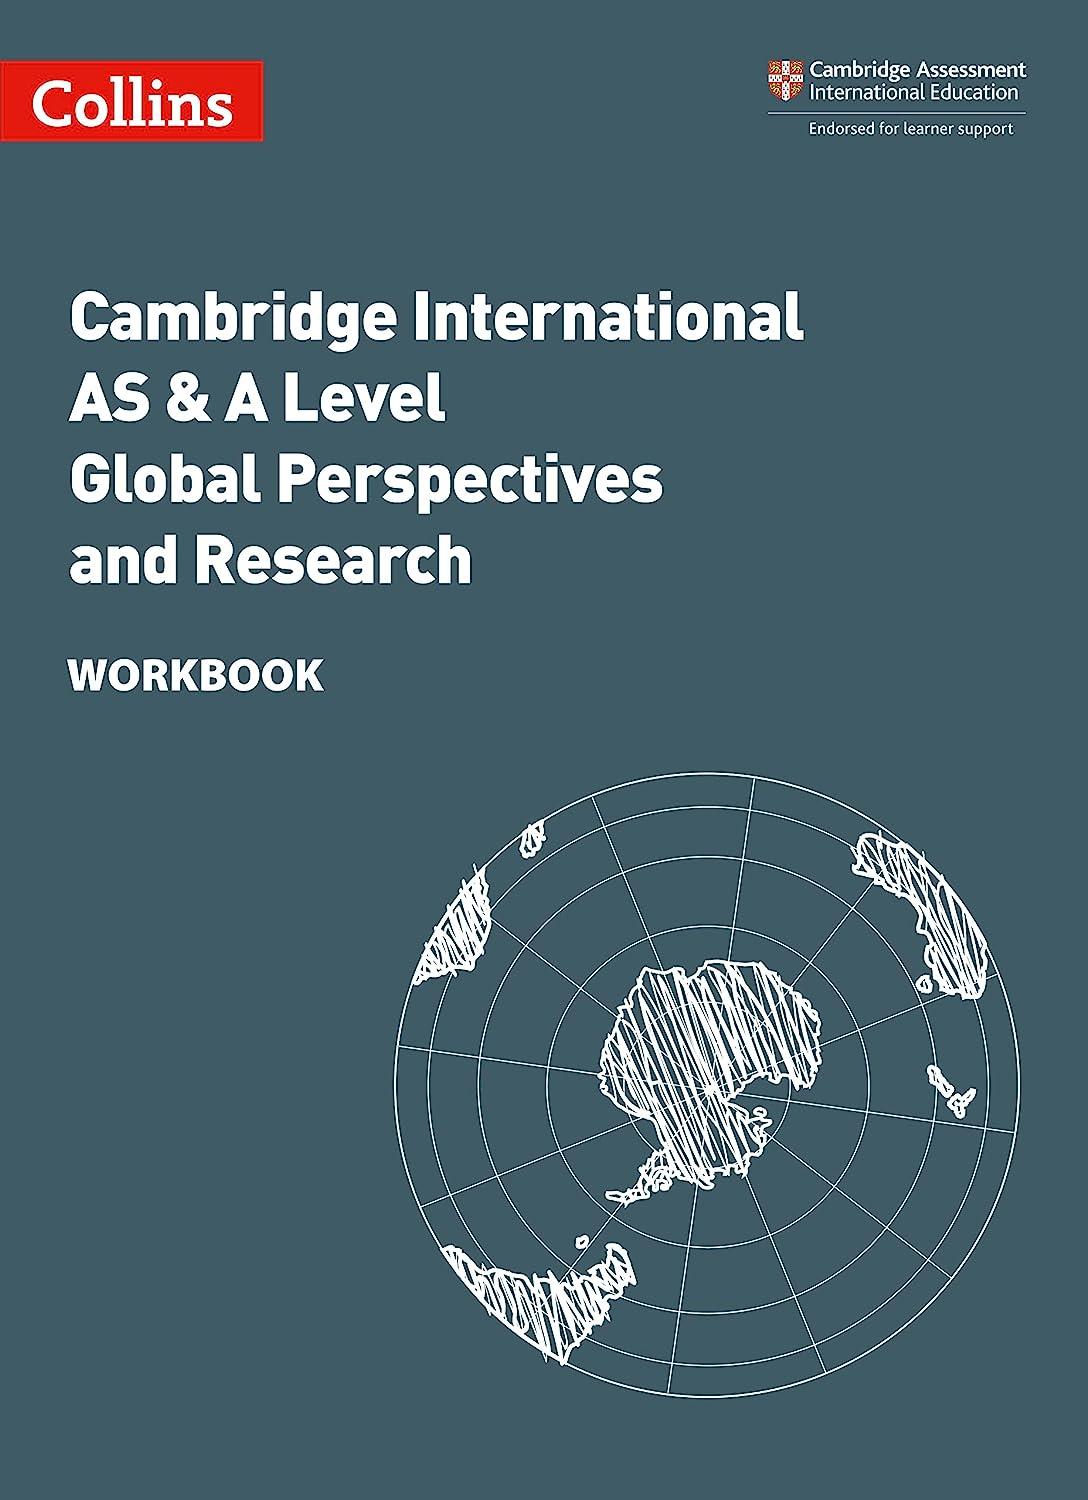 collins cambridge international as and a level global perspectives and research workbook 1st edition lucy